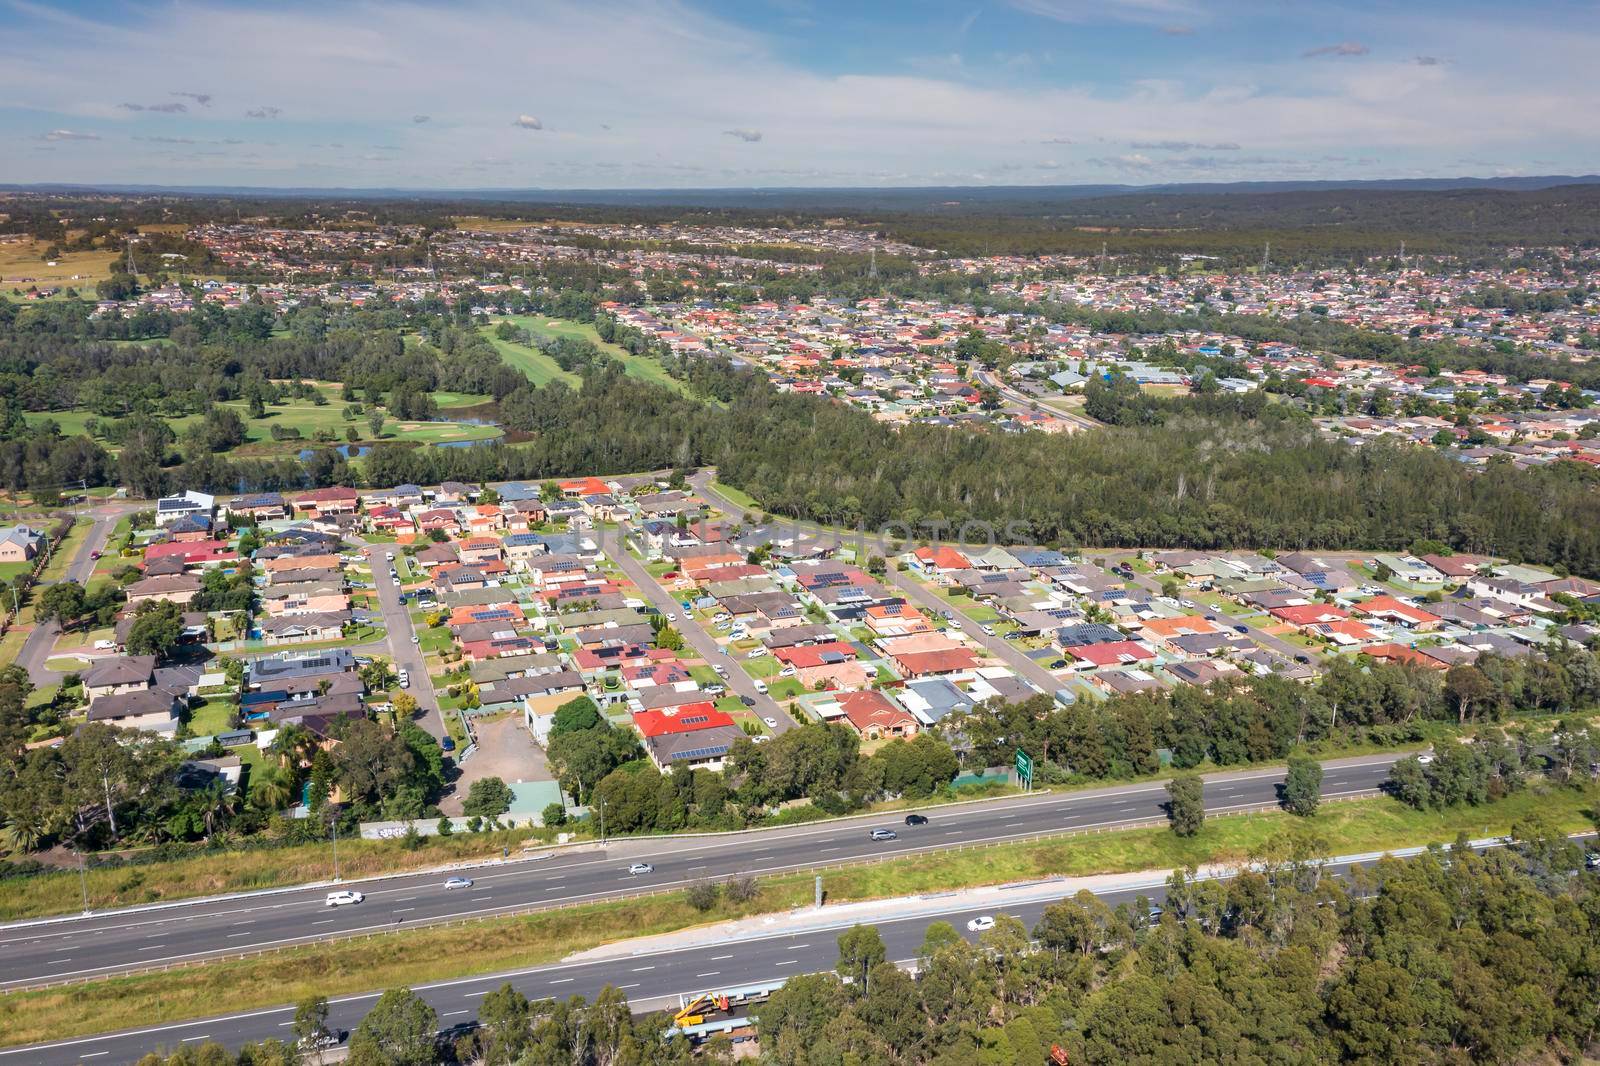 Aerial view of the suburb of South Penrith in greater Sydney in Australia by WittkePhotos